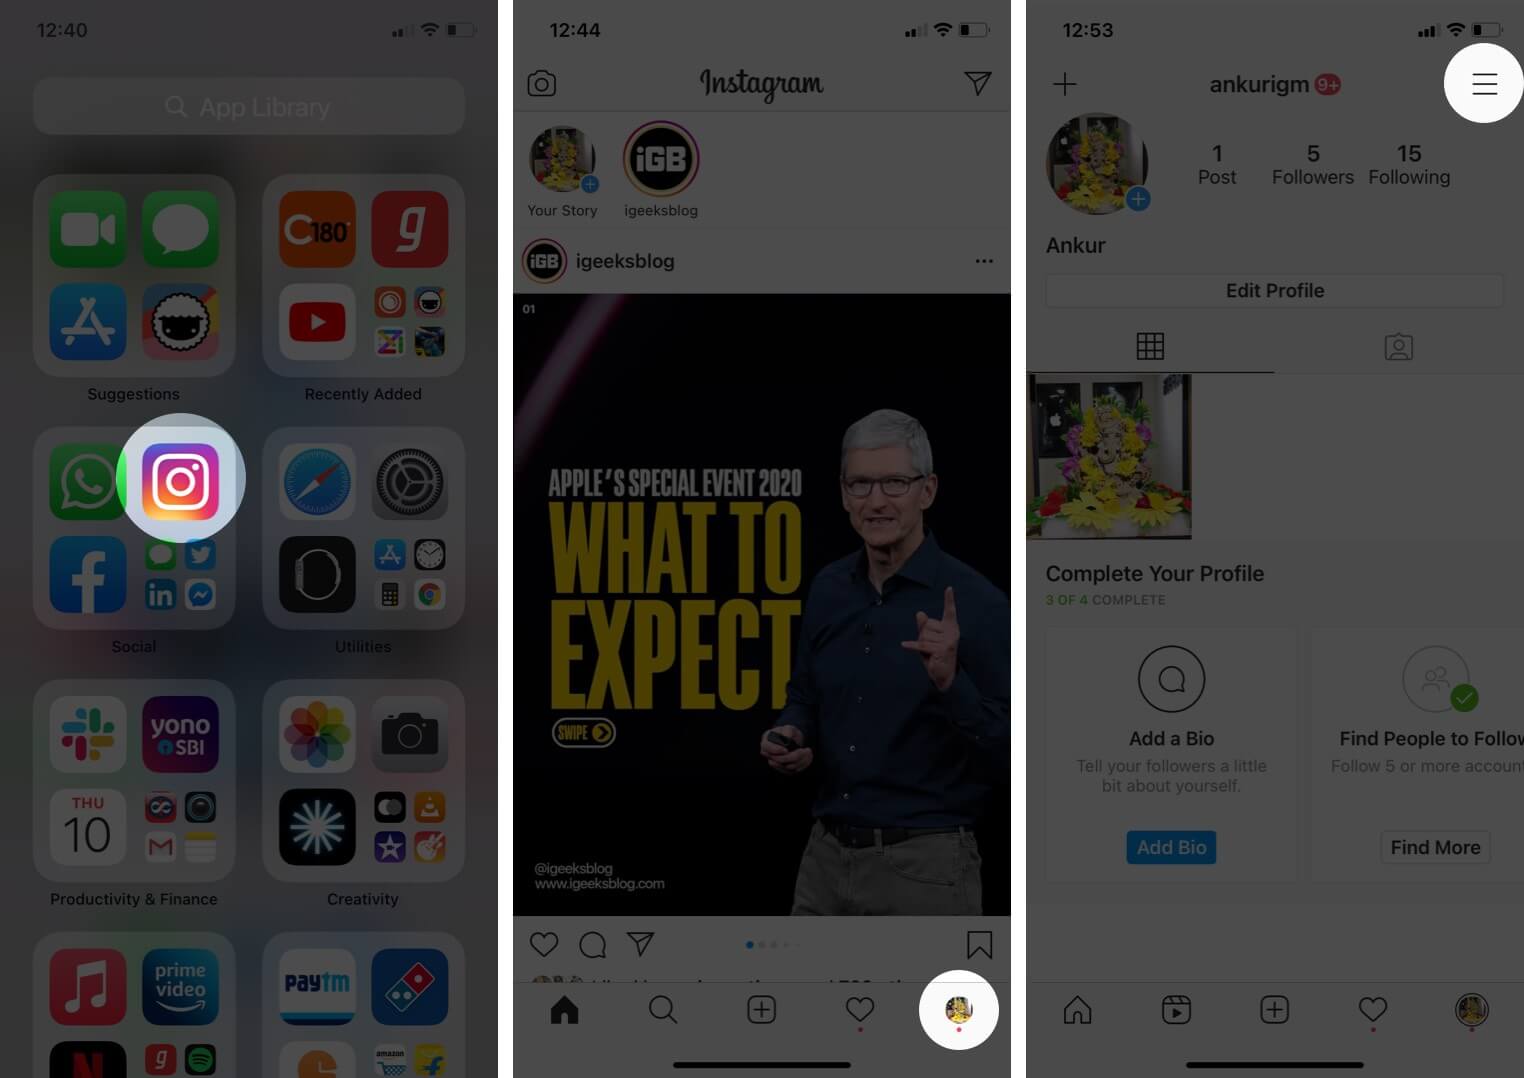 launch instagram app tap on profile and then tap on hamburger icon on iphone